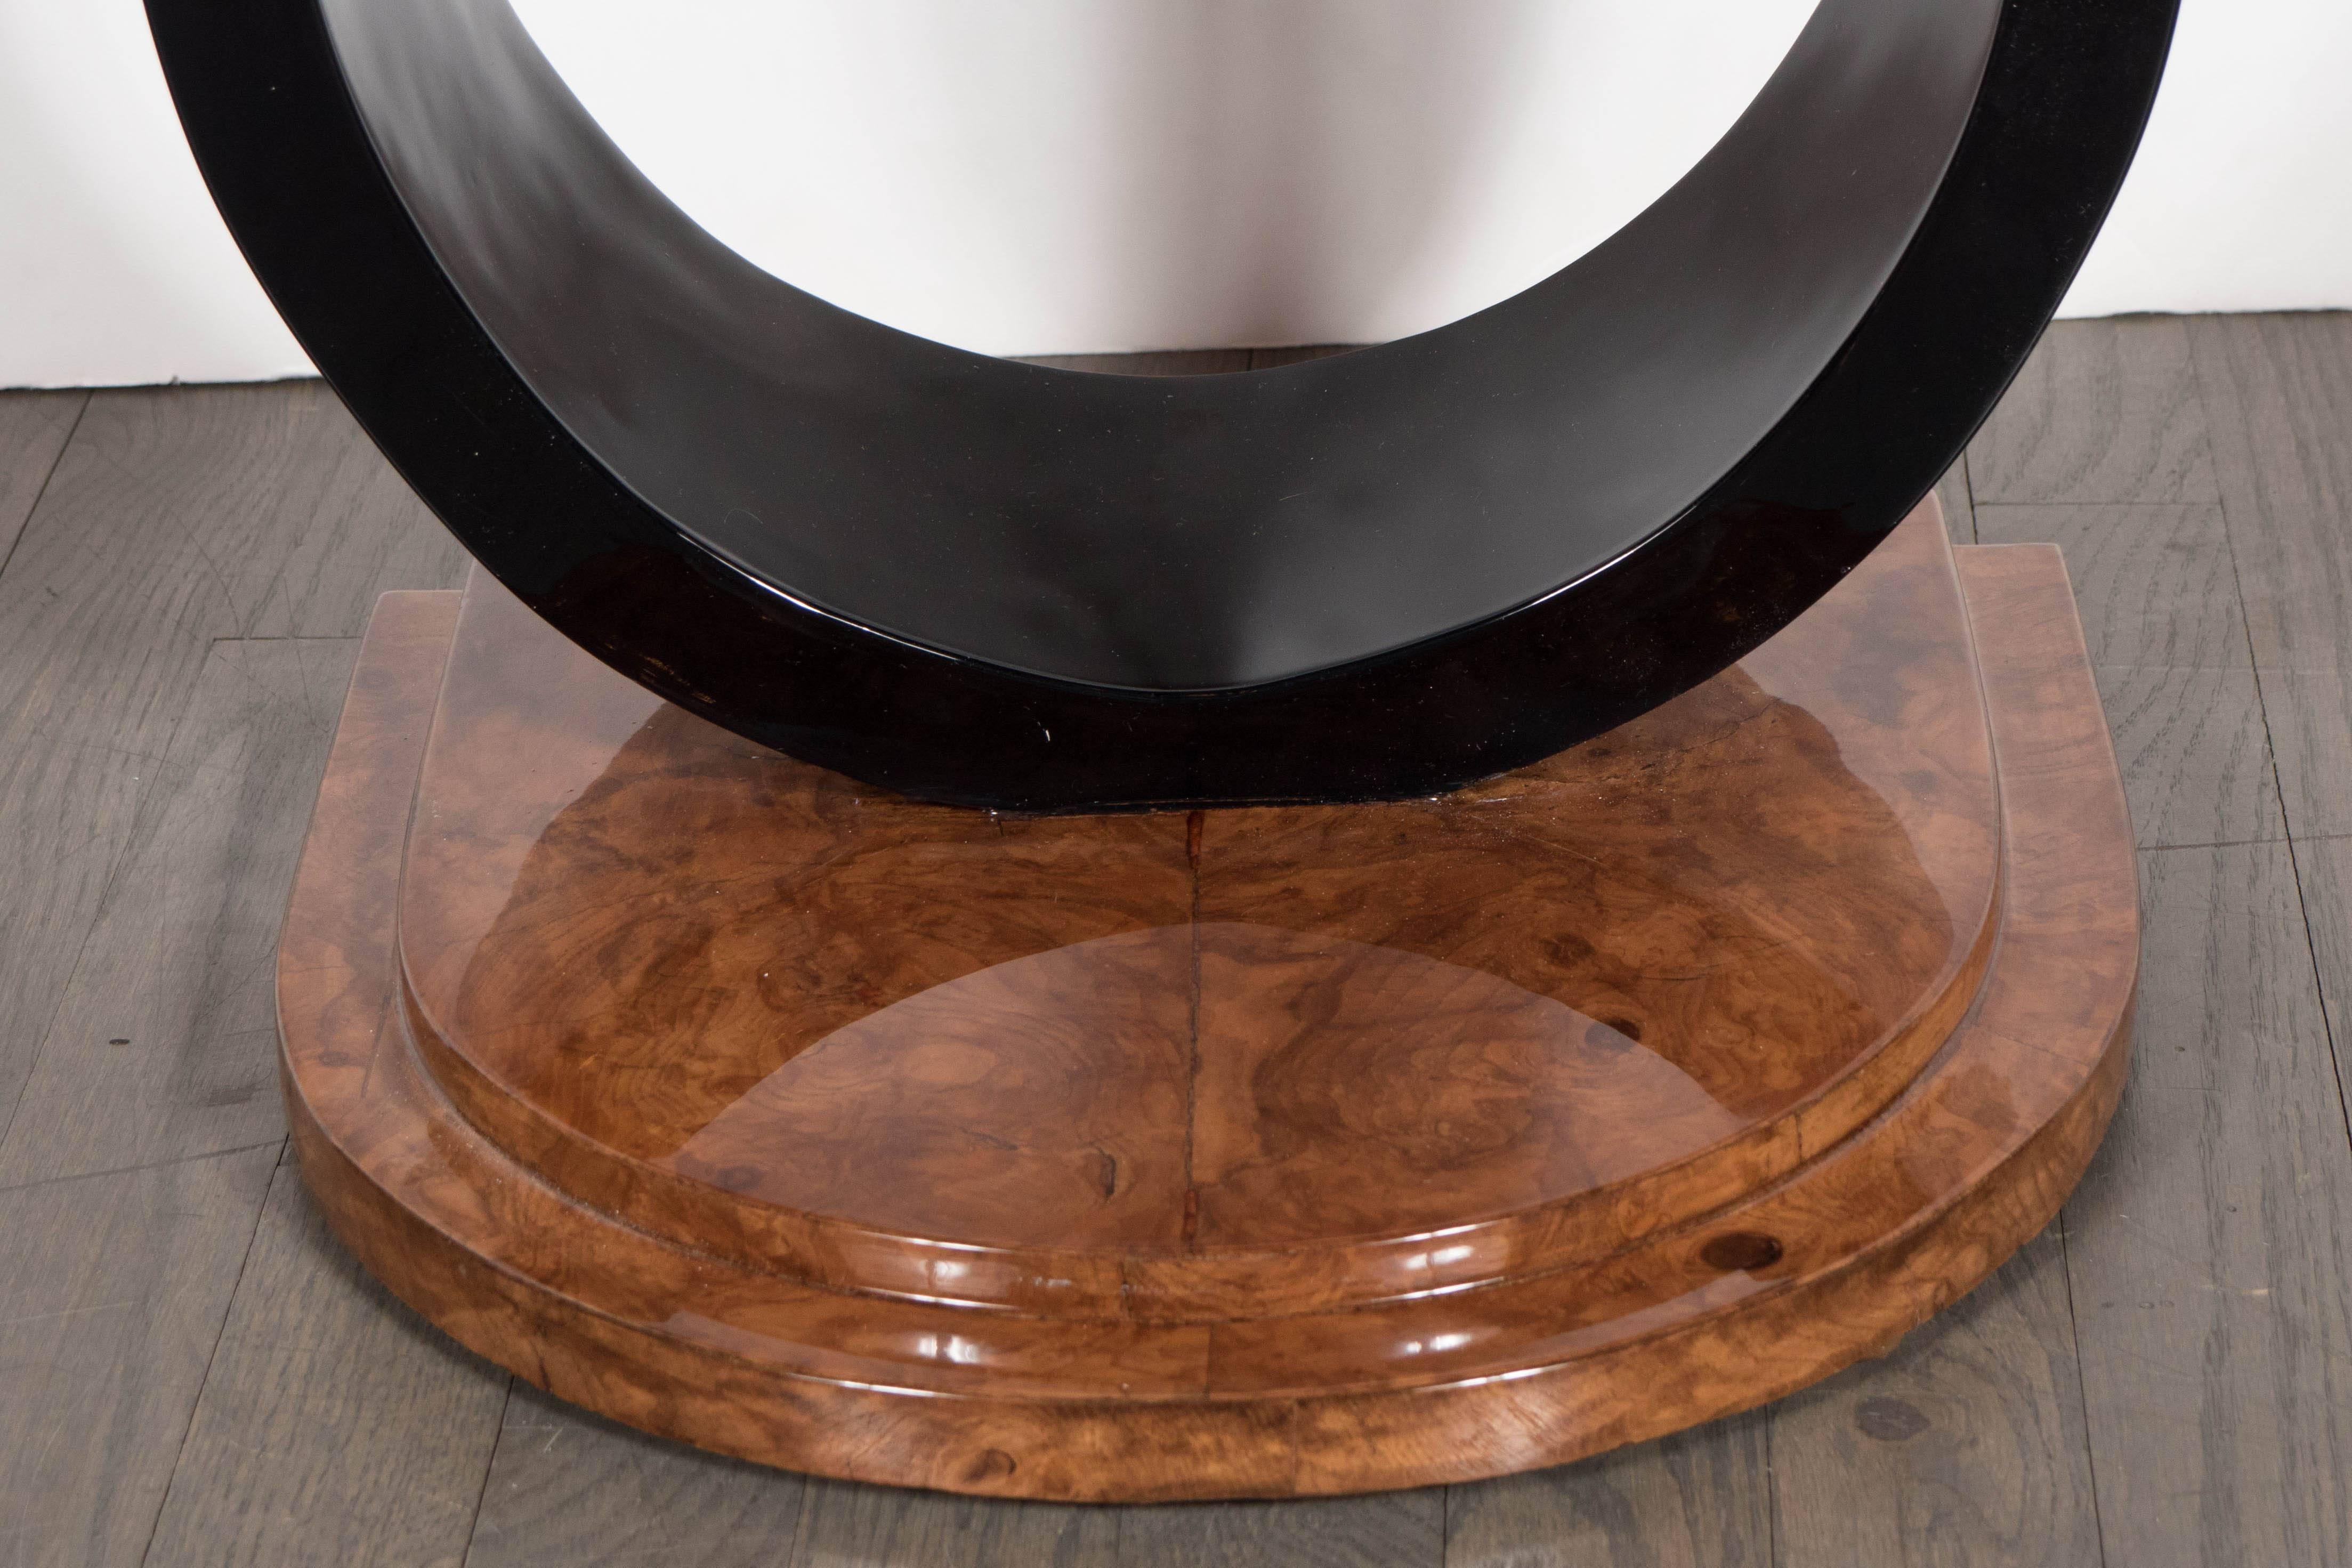 An Art Deco machine age occasional or drinks table by the Modernage Furniture Company. It features an exaggerated U-form stand in black lacquer on a stepped demilune burled Carpathian elm base. Nestled between the upper structure of the U-form stand